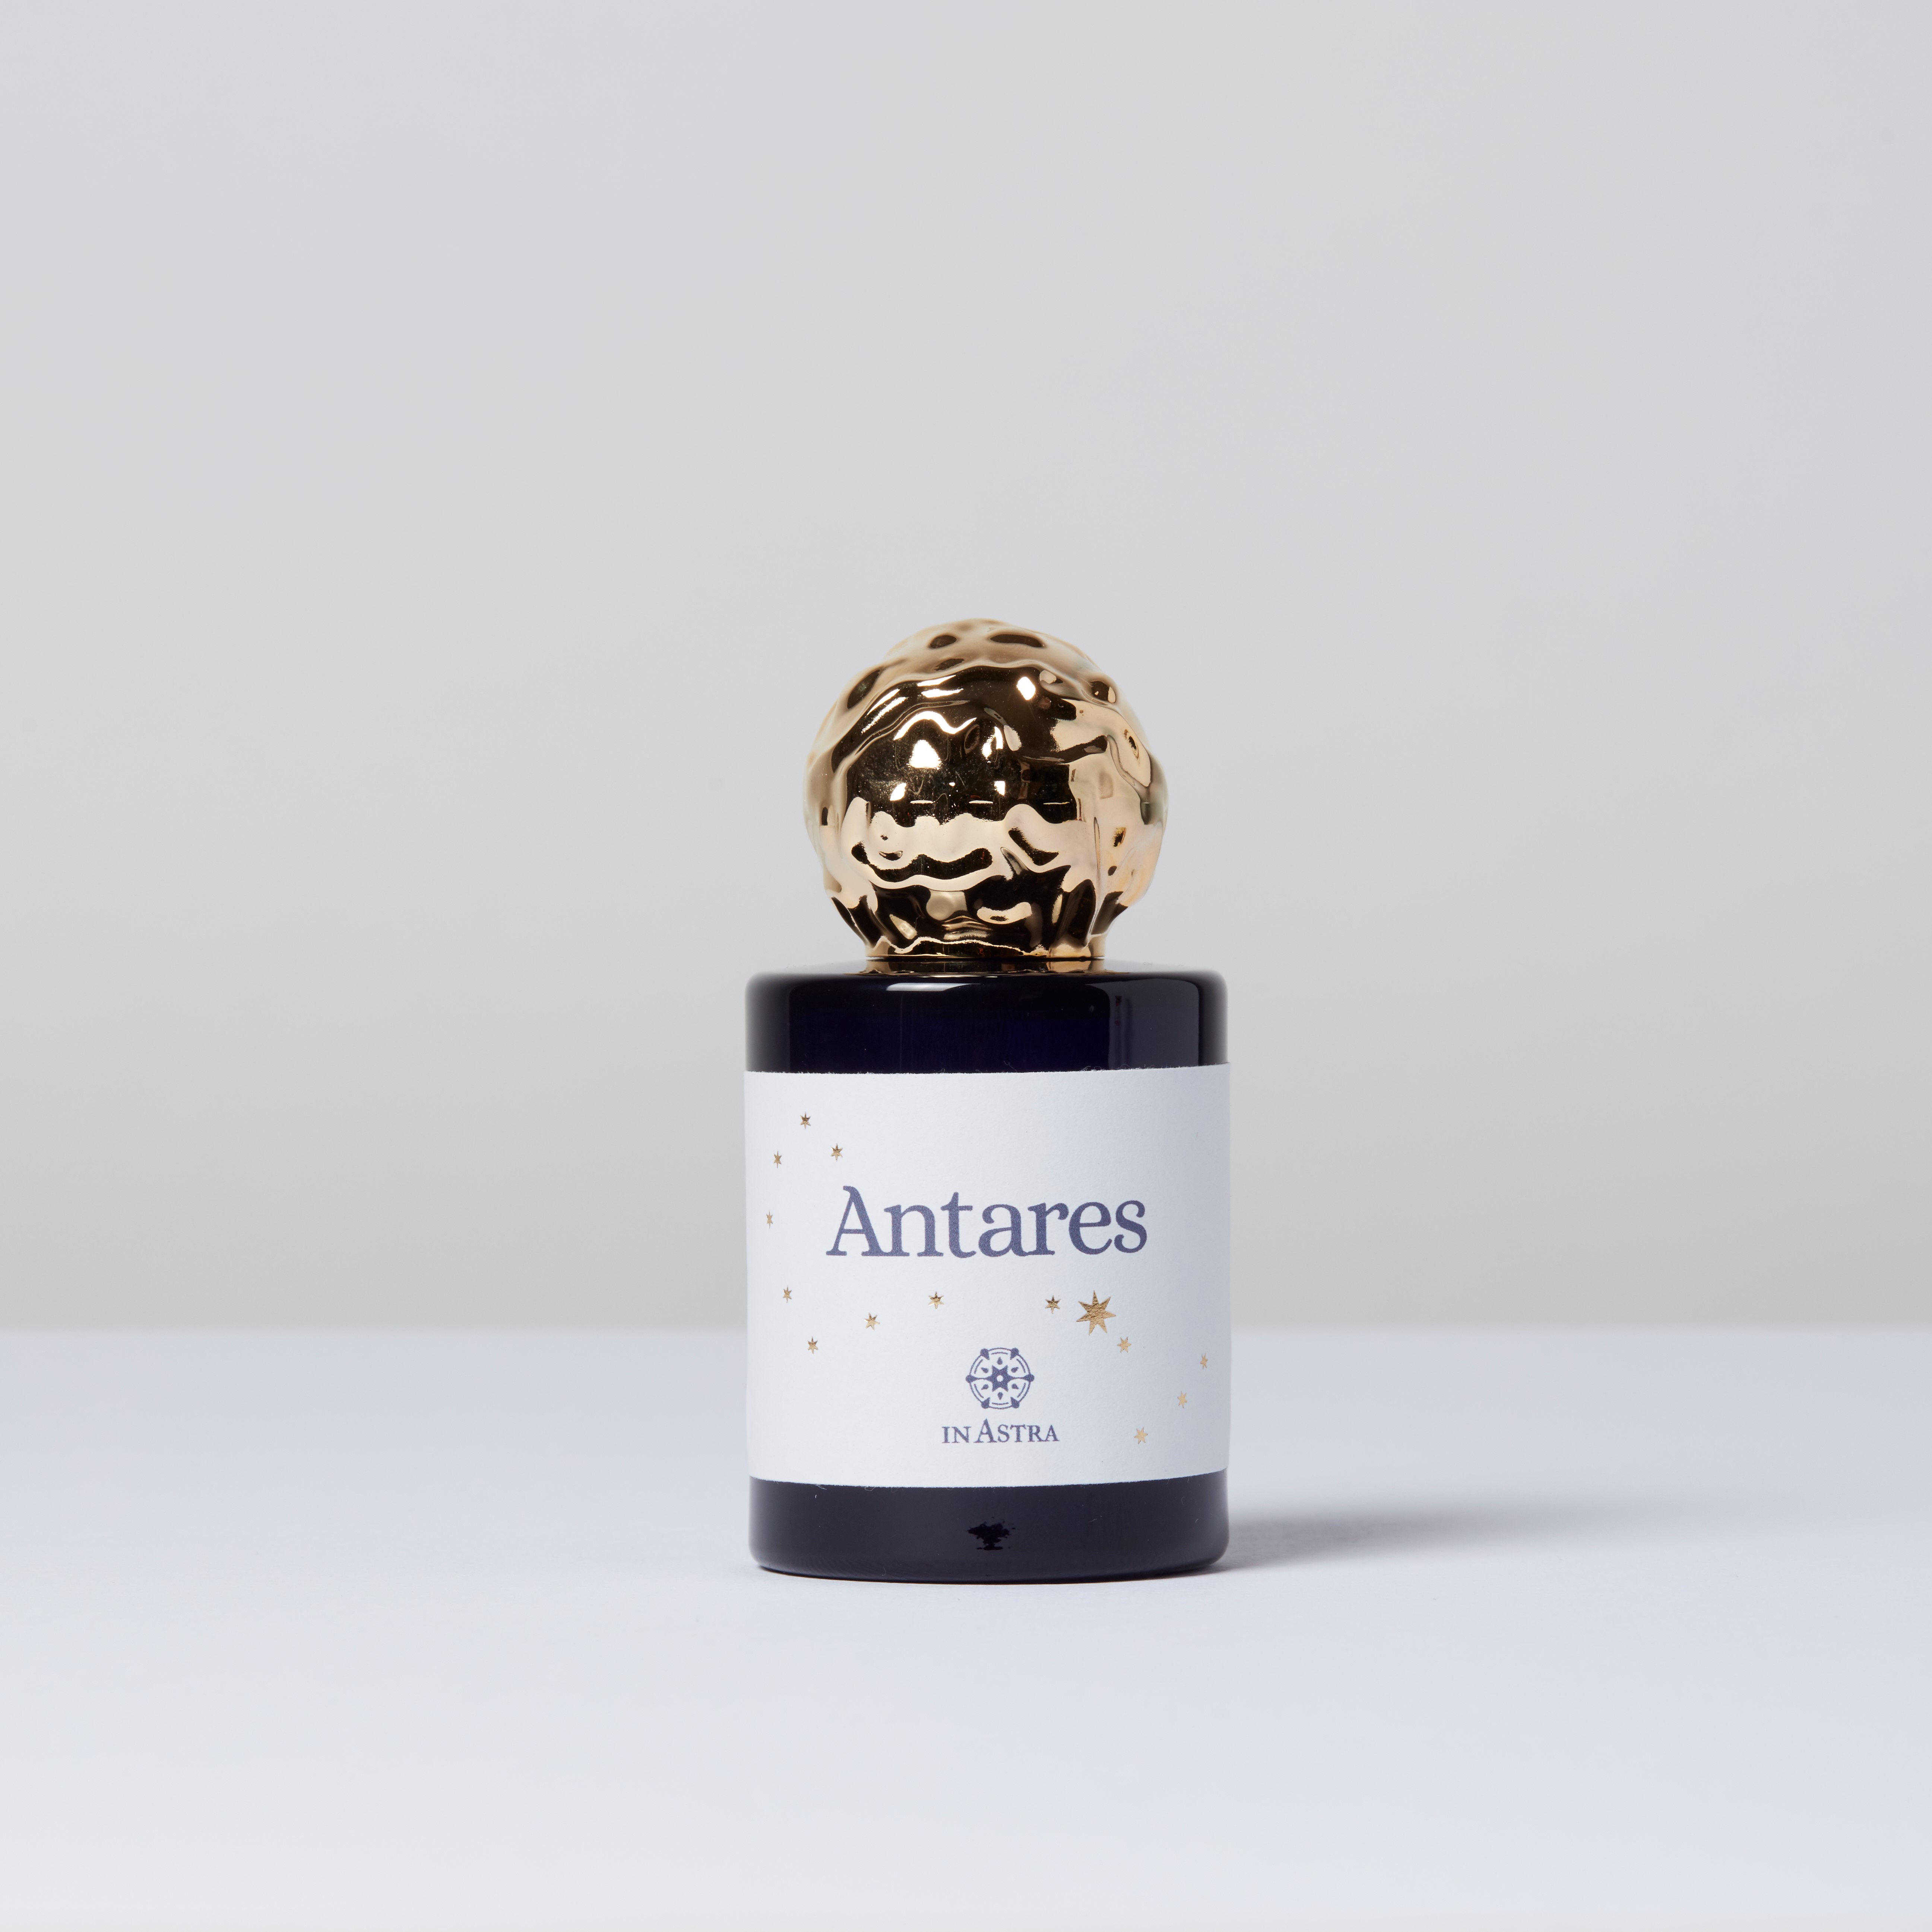 In Astra Antares bottle